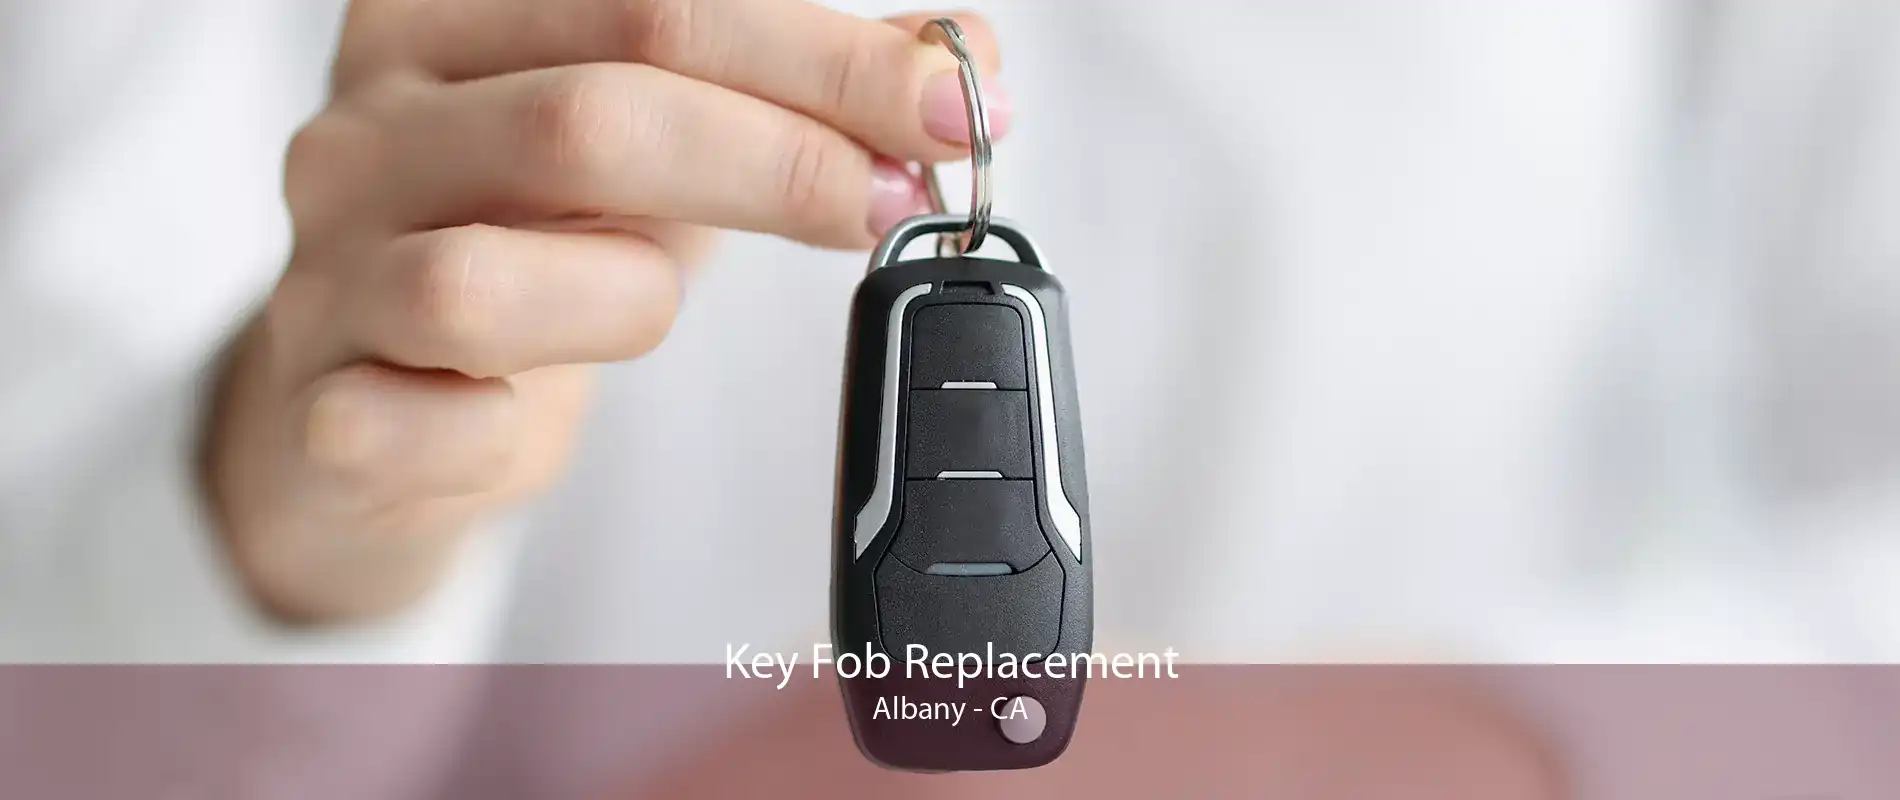 Key Fob Replacement Albany - CA